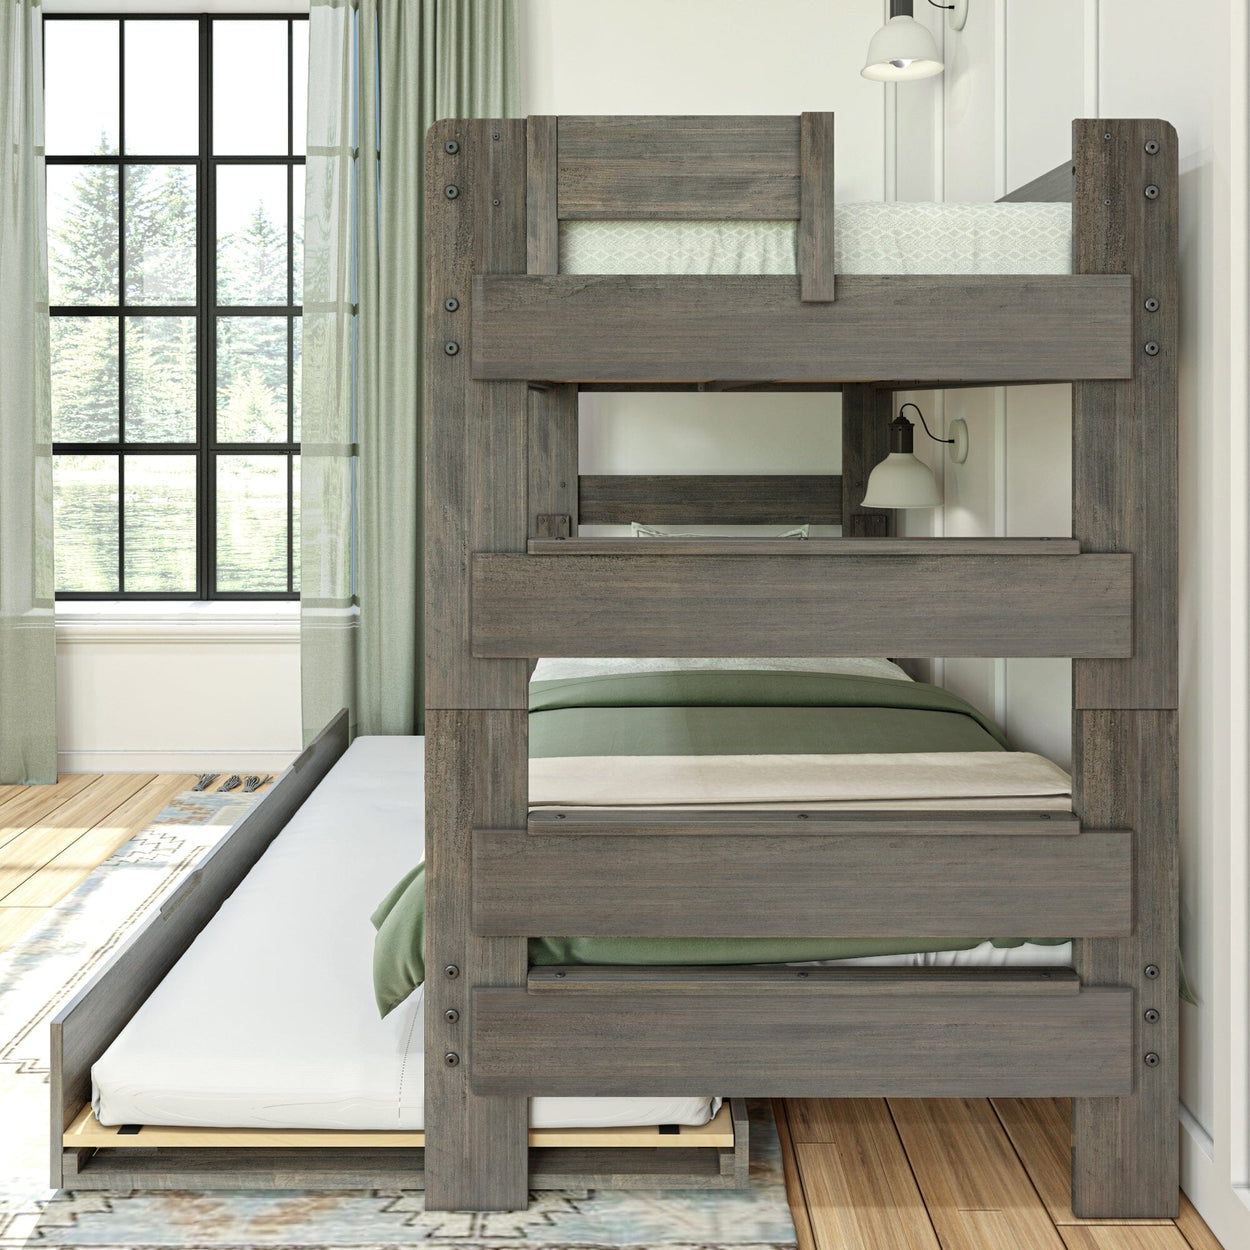 196201-185 : Bunk Beds Farmhouse Twin over Twin Bunk Bed with Trundle, Driftwood